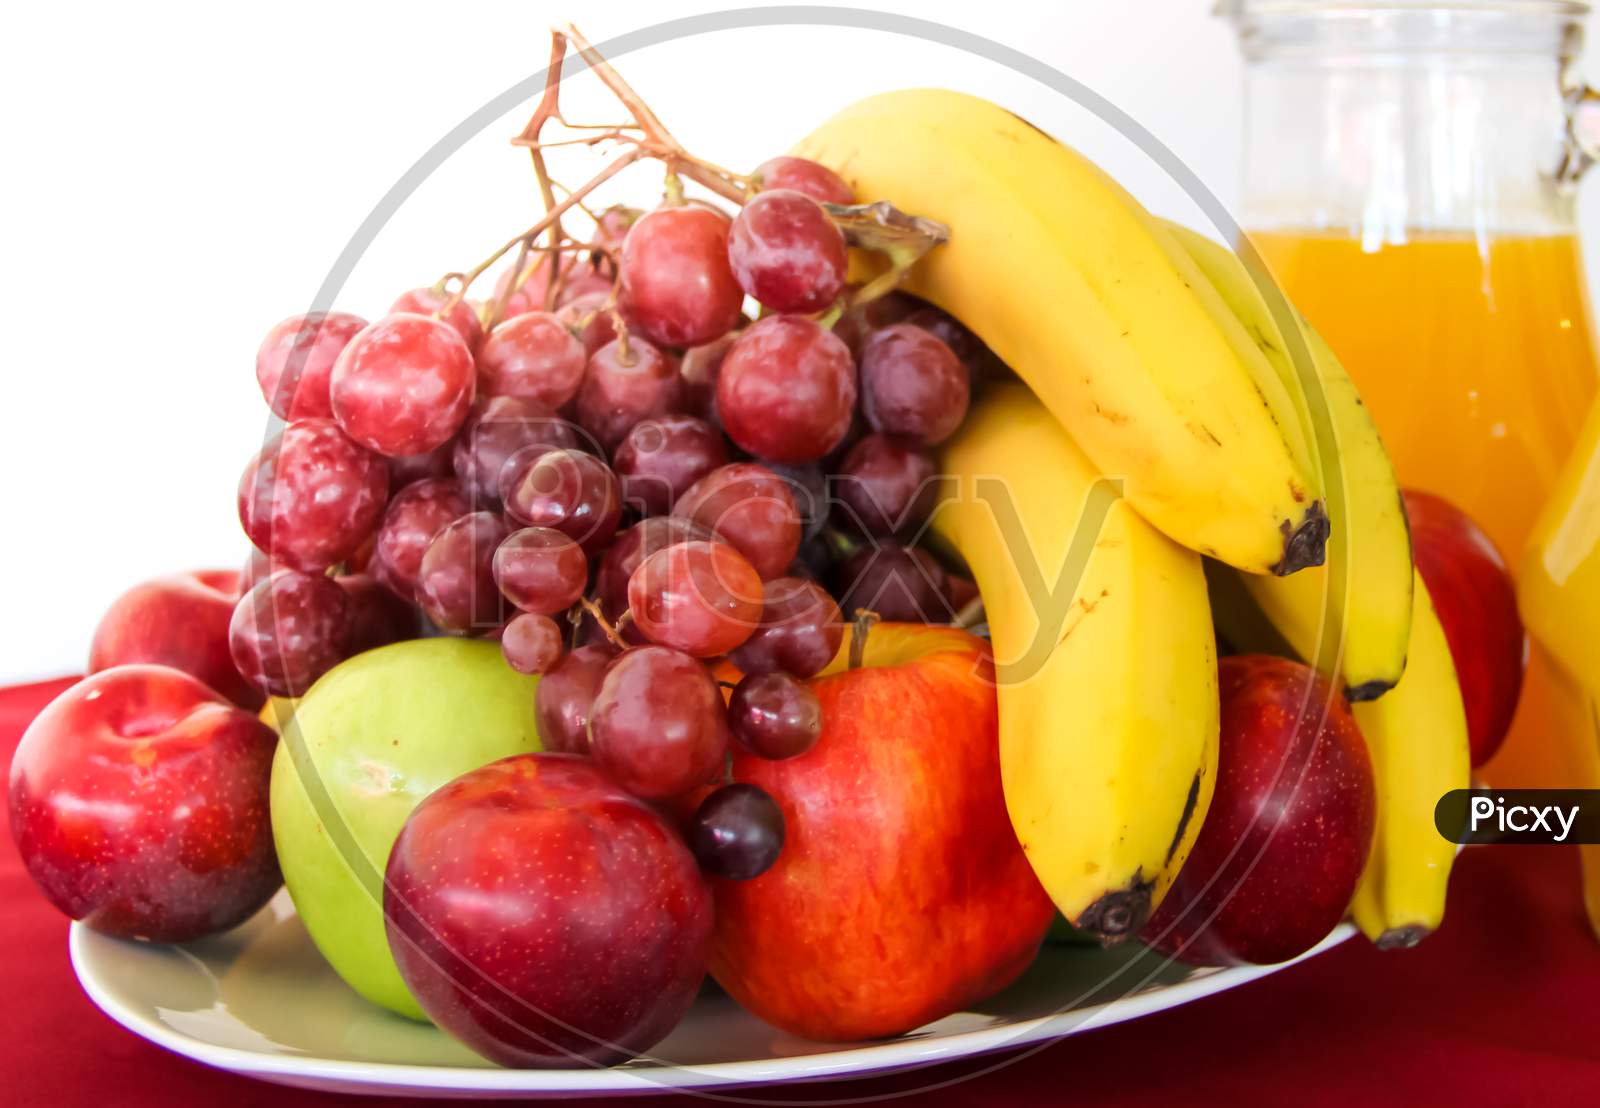 Variety Of Fresh Fruits Served On A Plate